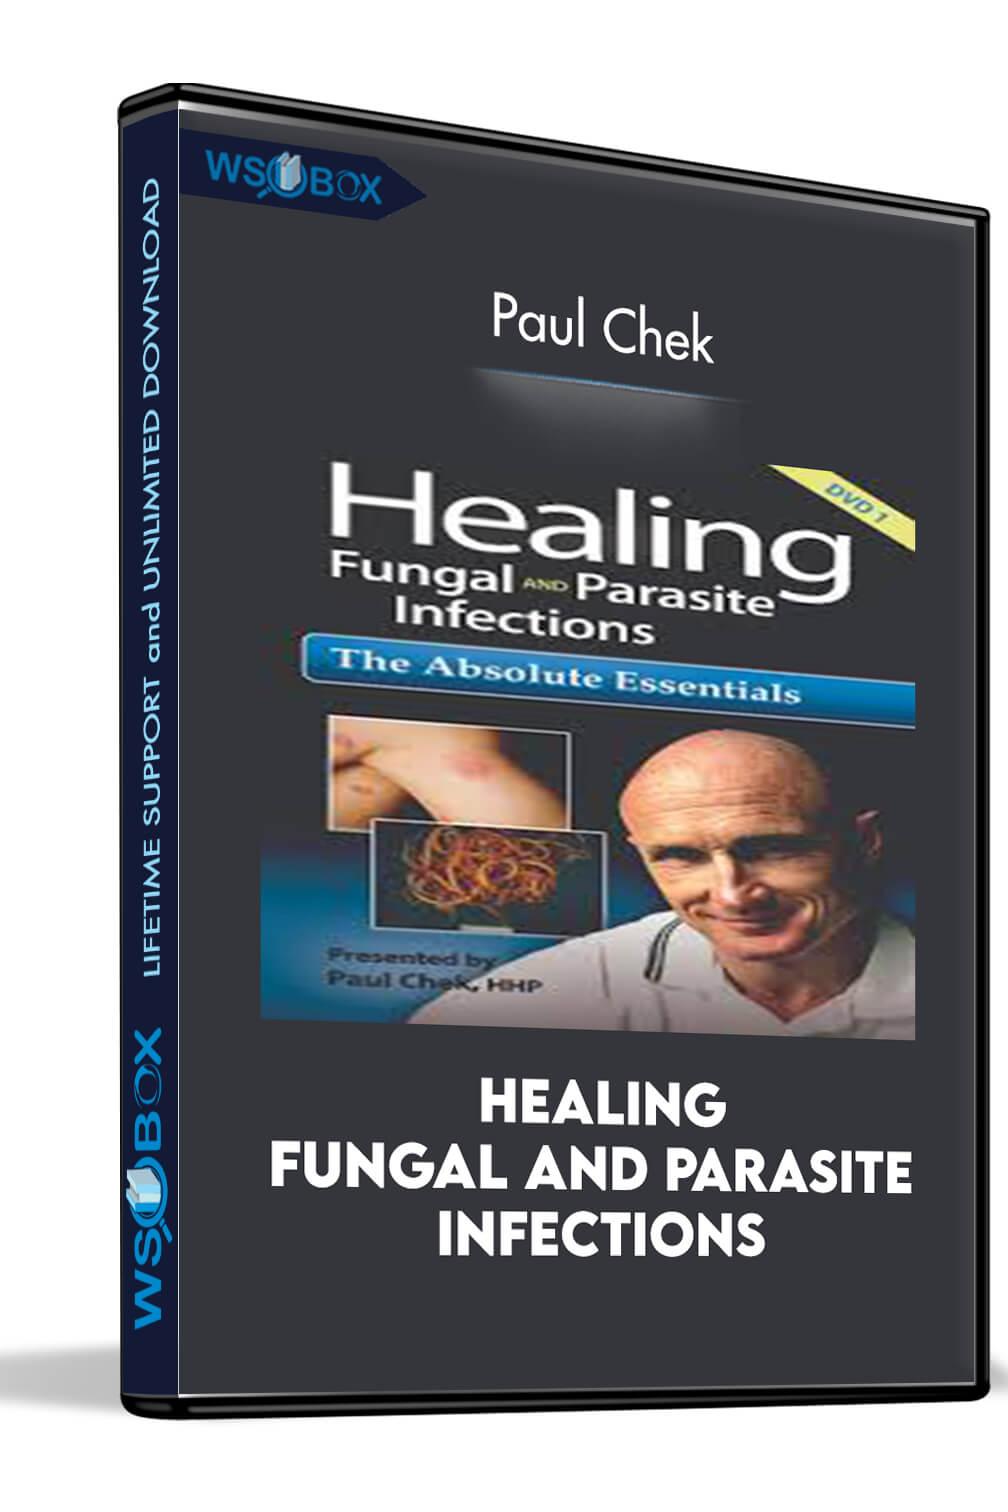 Healing Fungal and Parasite Infections – Paul Chek